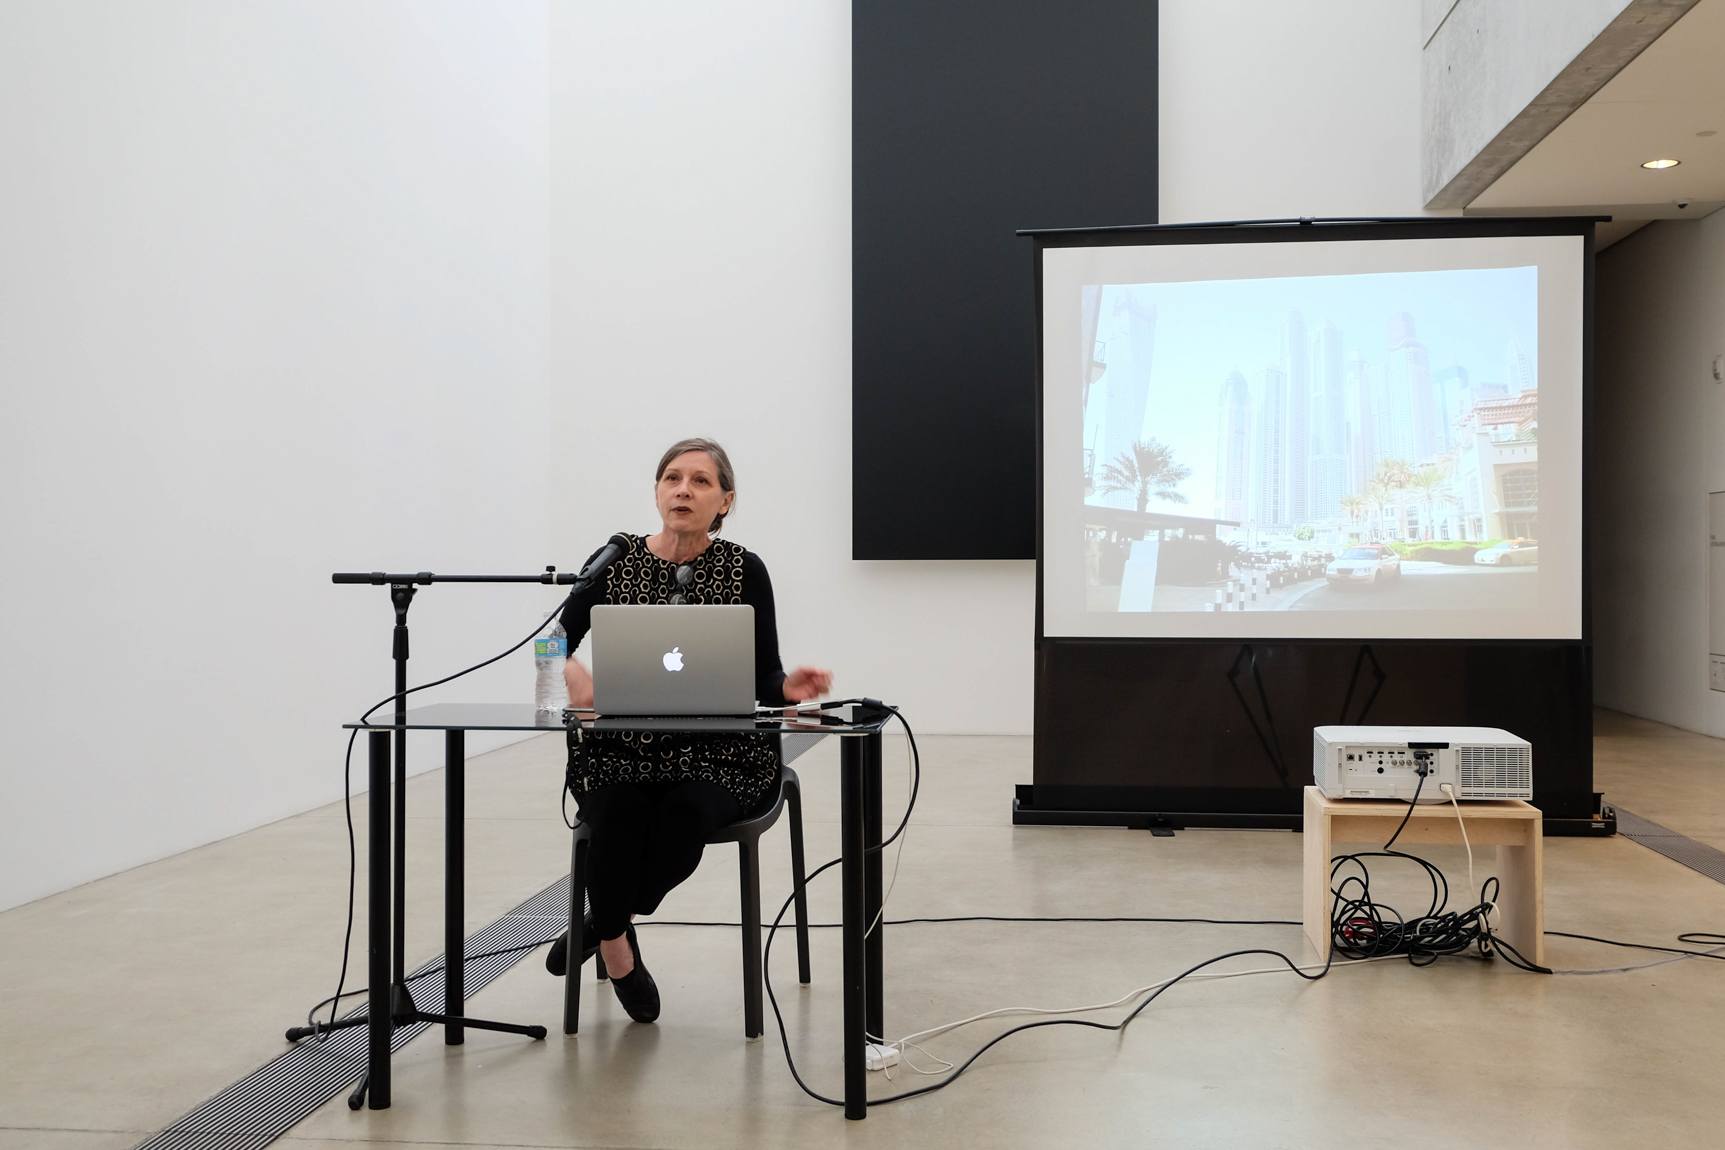 Keller Easterling sits in the Lower-Main Gallery at a small table in front of a projection screen and speaks into a microphone.